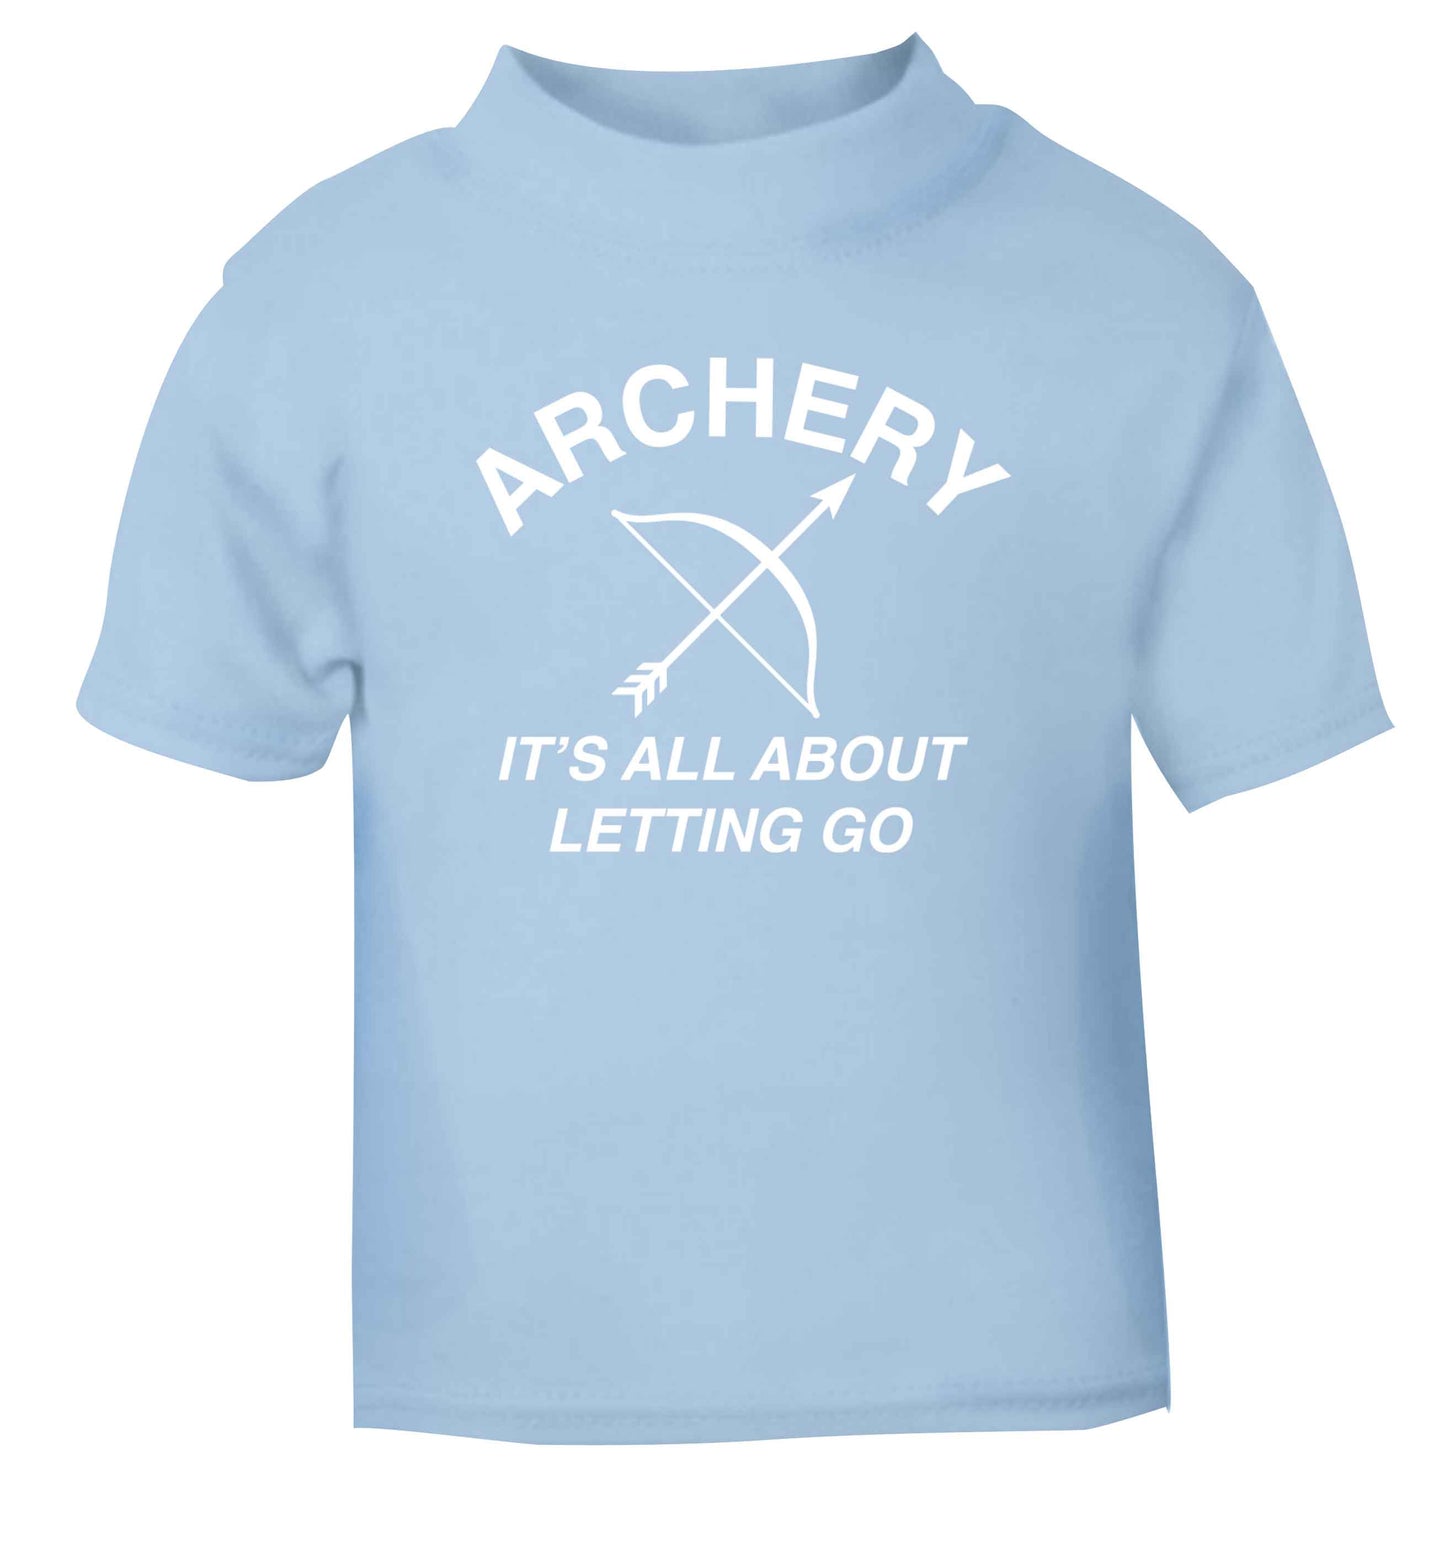 Archery it's all about letting go light blue Baby Toddler Tshirt 2 Years